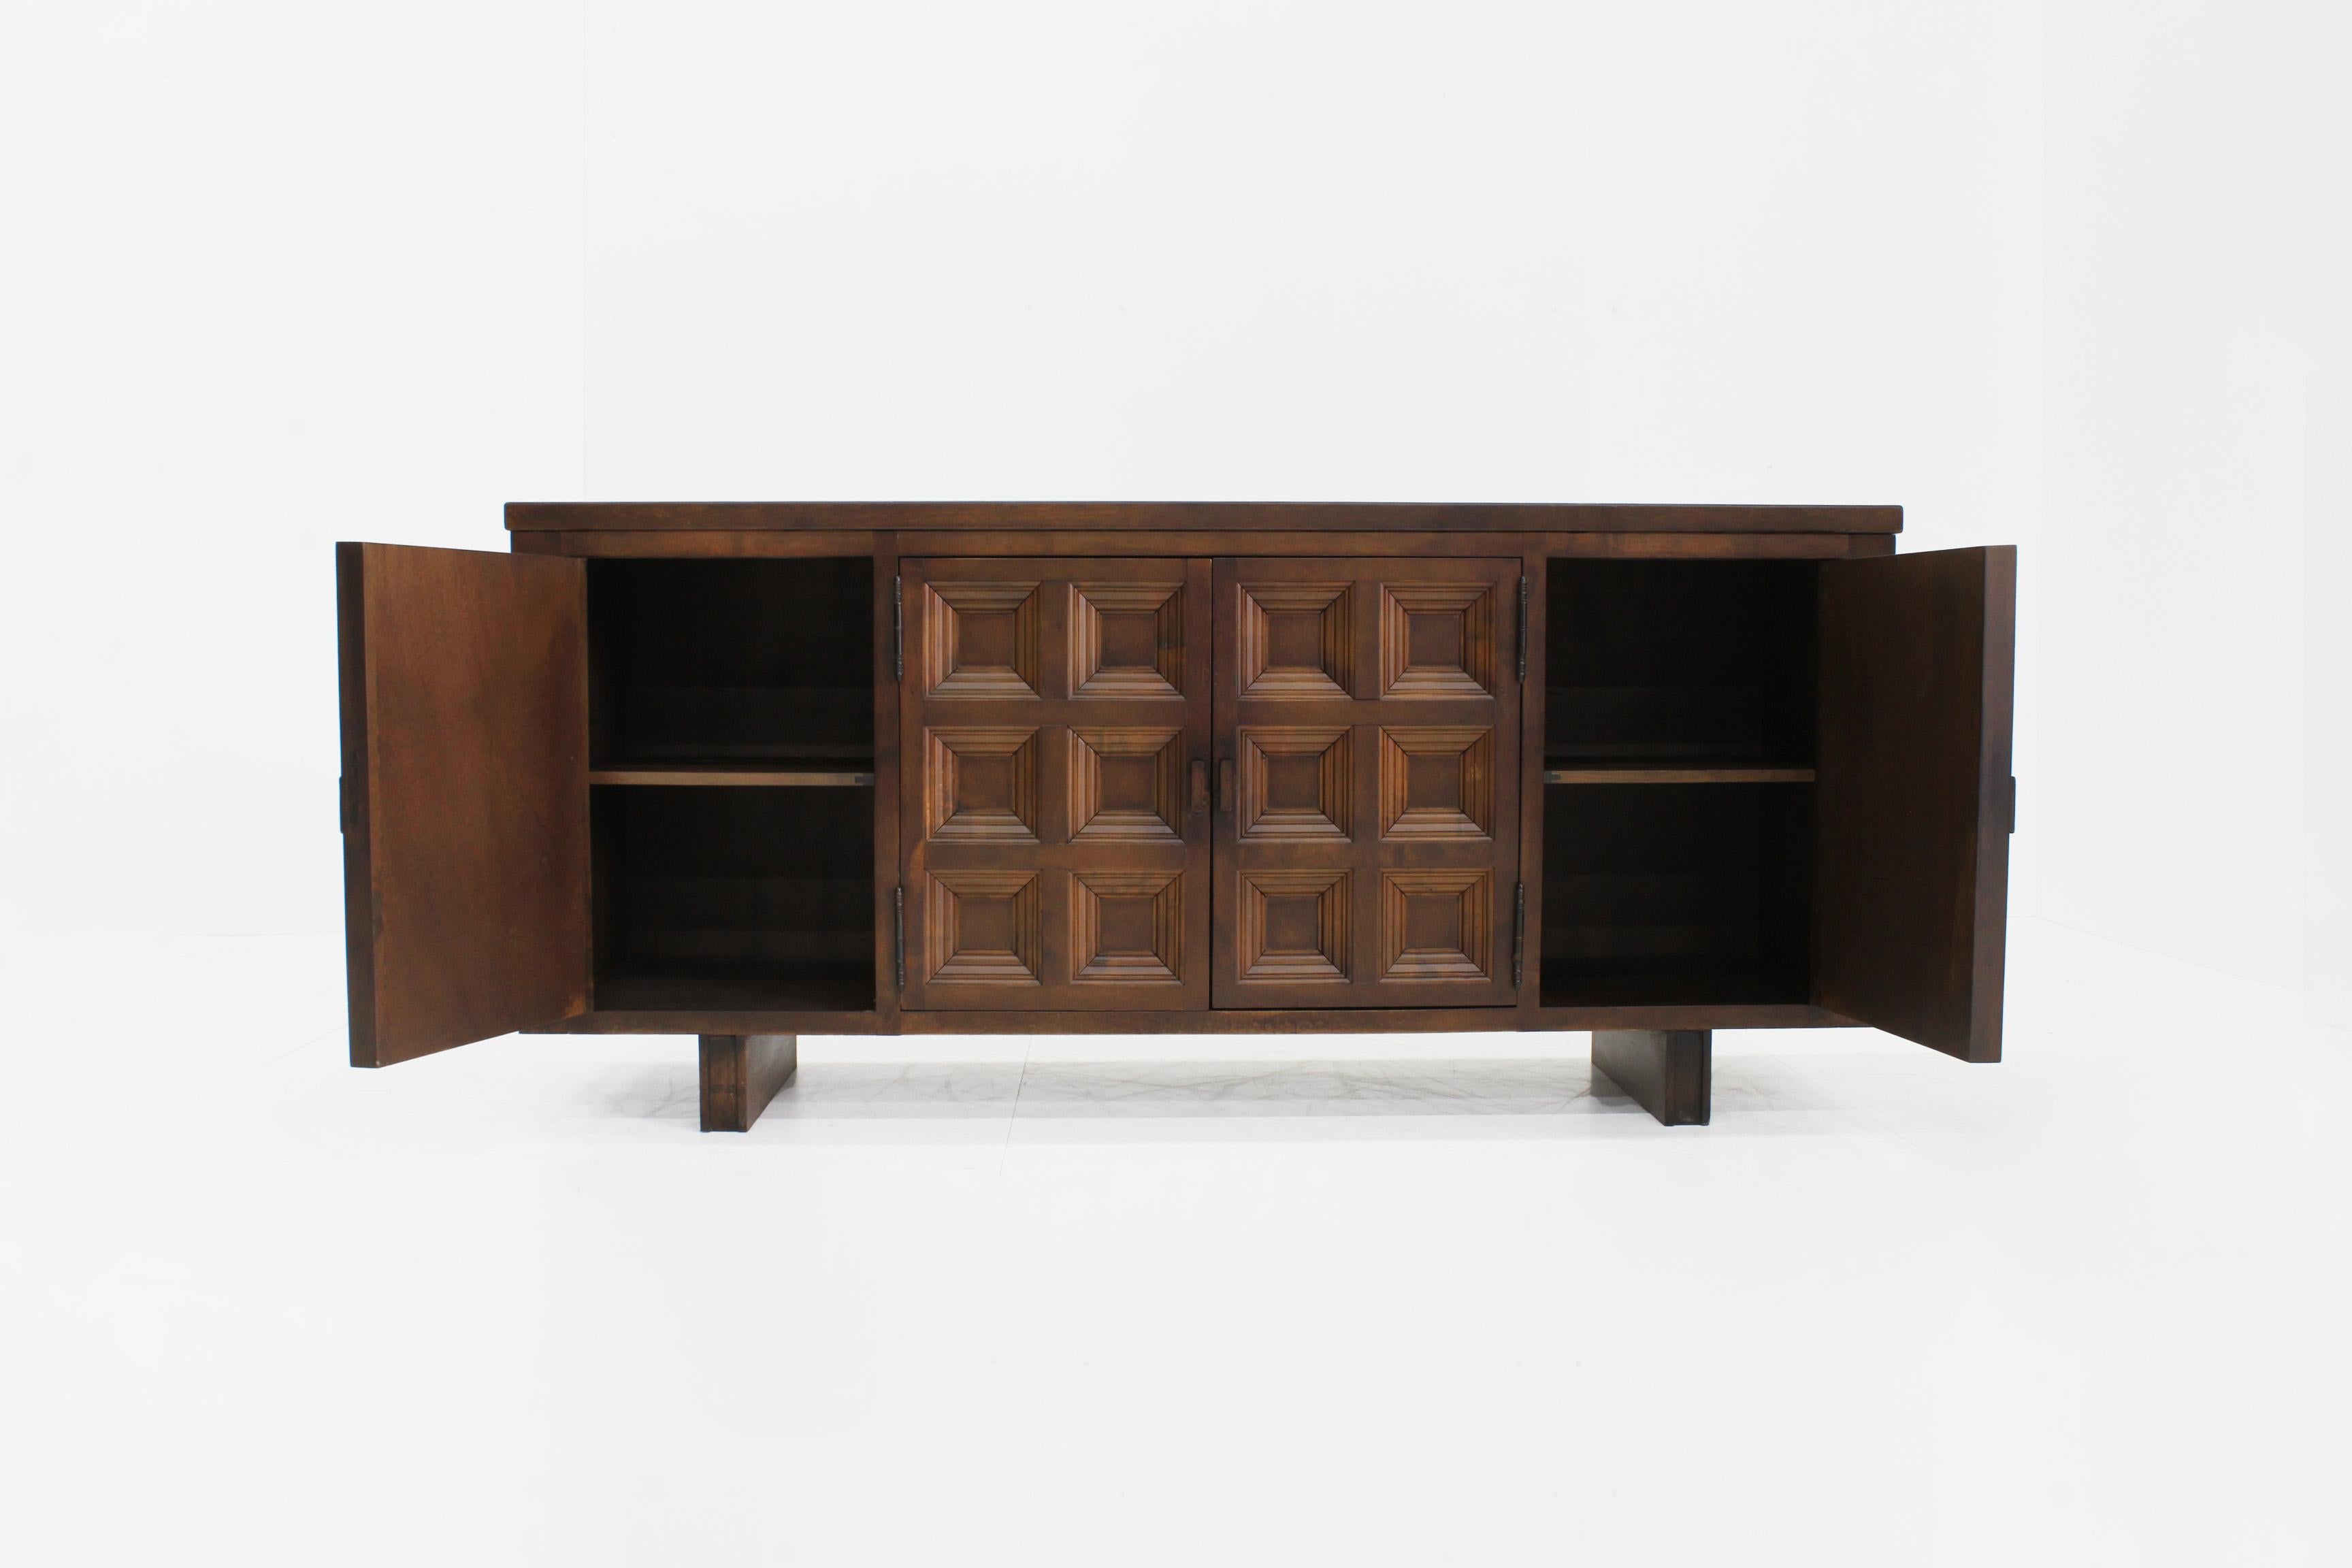 Spanish Brutalist Sideboard in Solid Walnut
 
Spanish Brutalist Sideboard in solid walnut wood from the 1960s. Beautifully designed with graphical squares on the front as well as the sides of the credenza. 
 
Plenty of storage space with 4 drawers